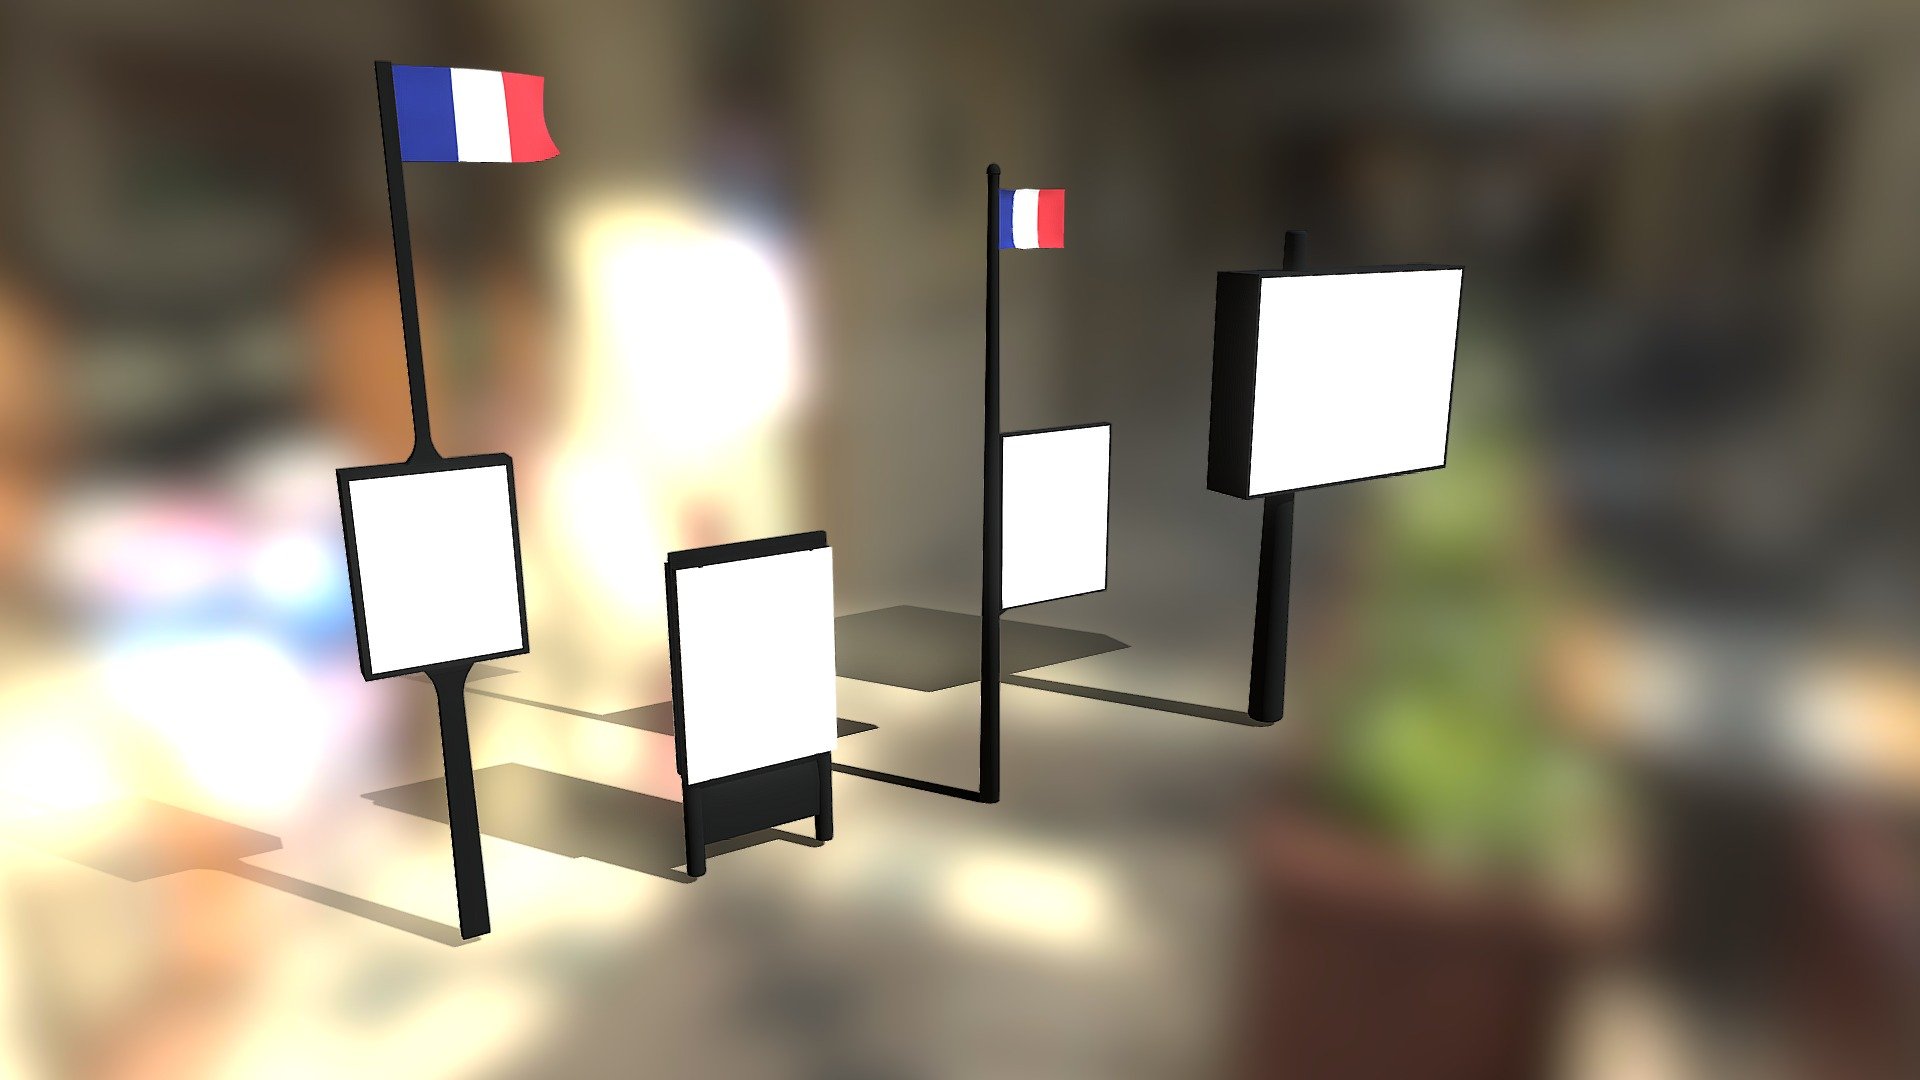 Different type of billboards that can be found in Paris street in France.

4 types of advertising board with shader and flag animation 3d model